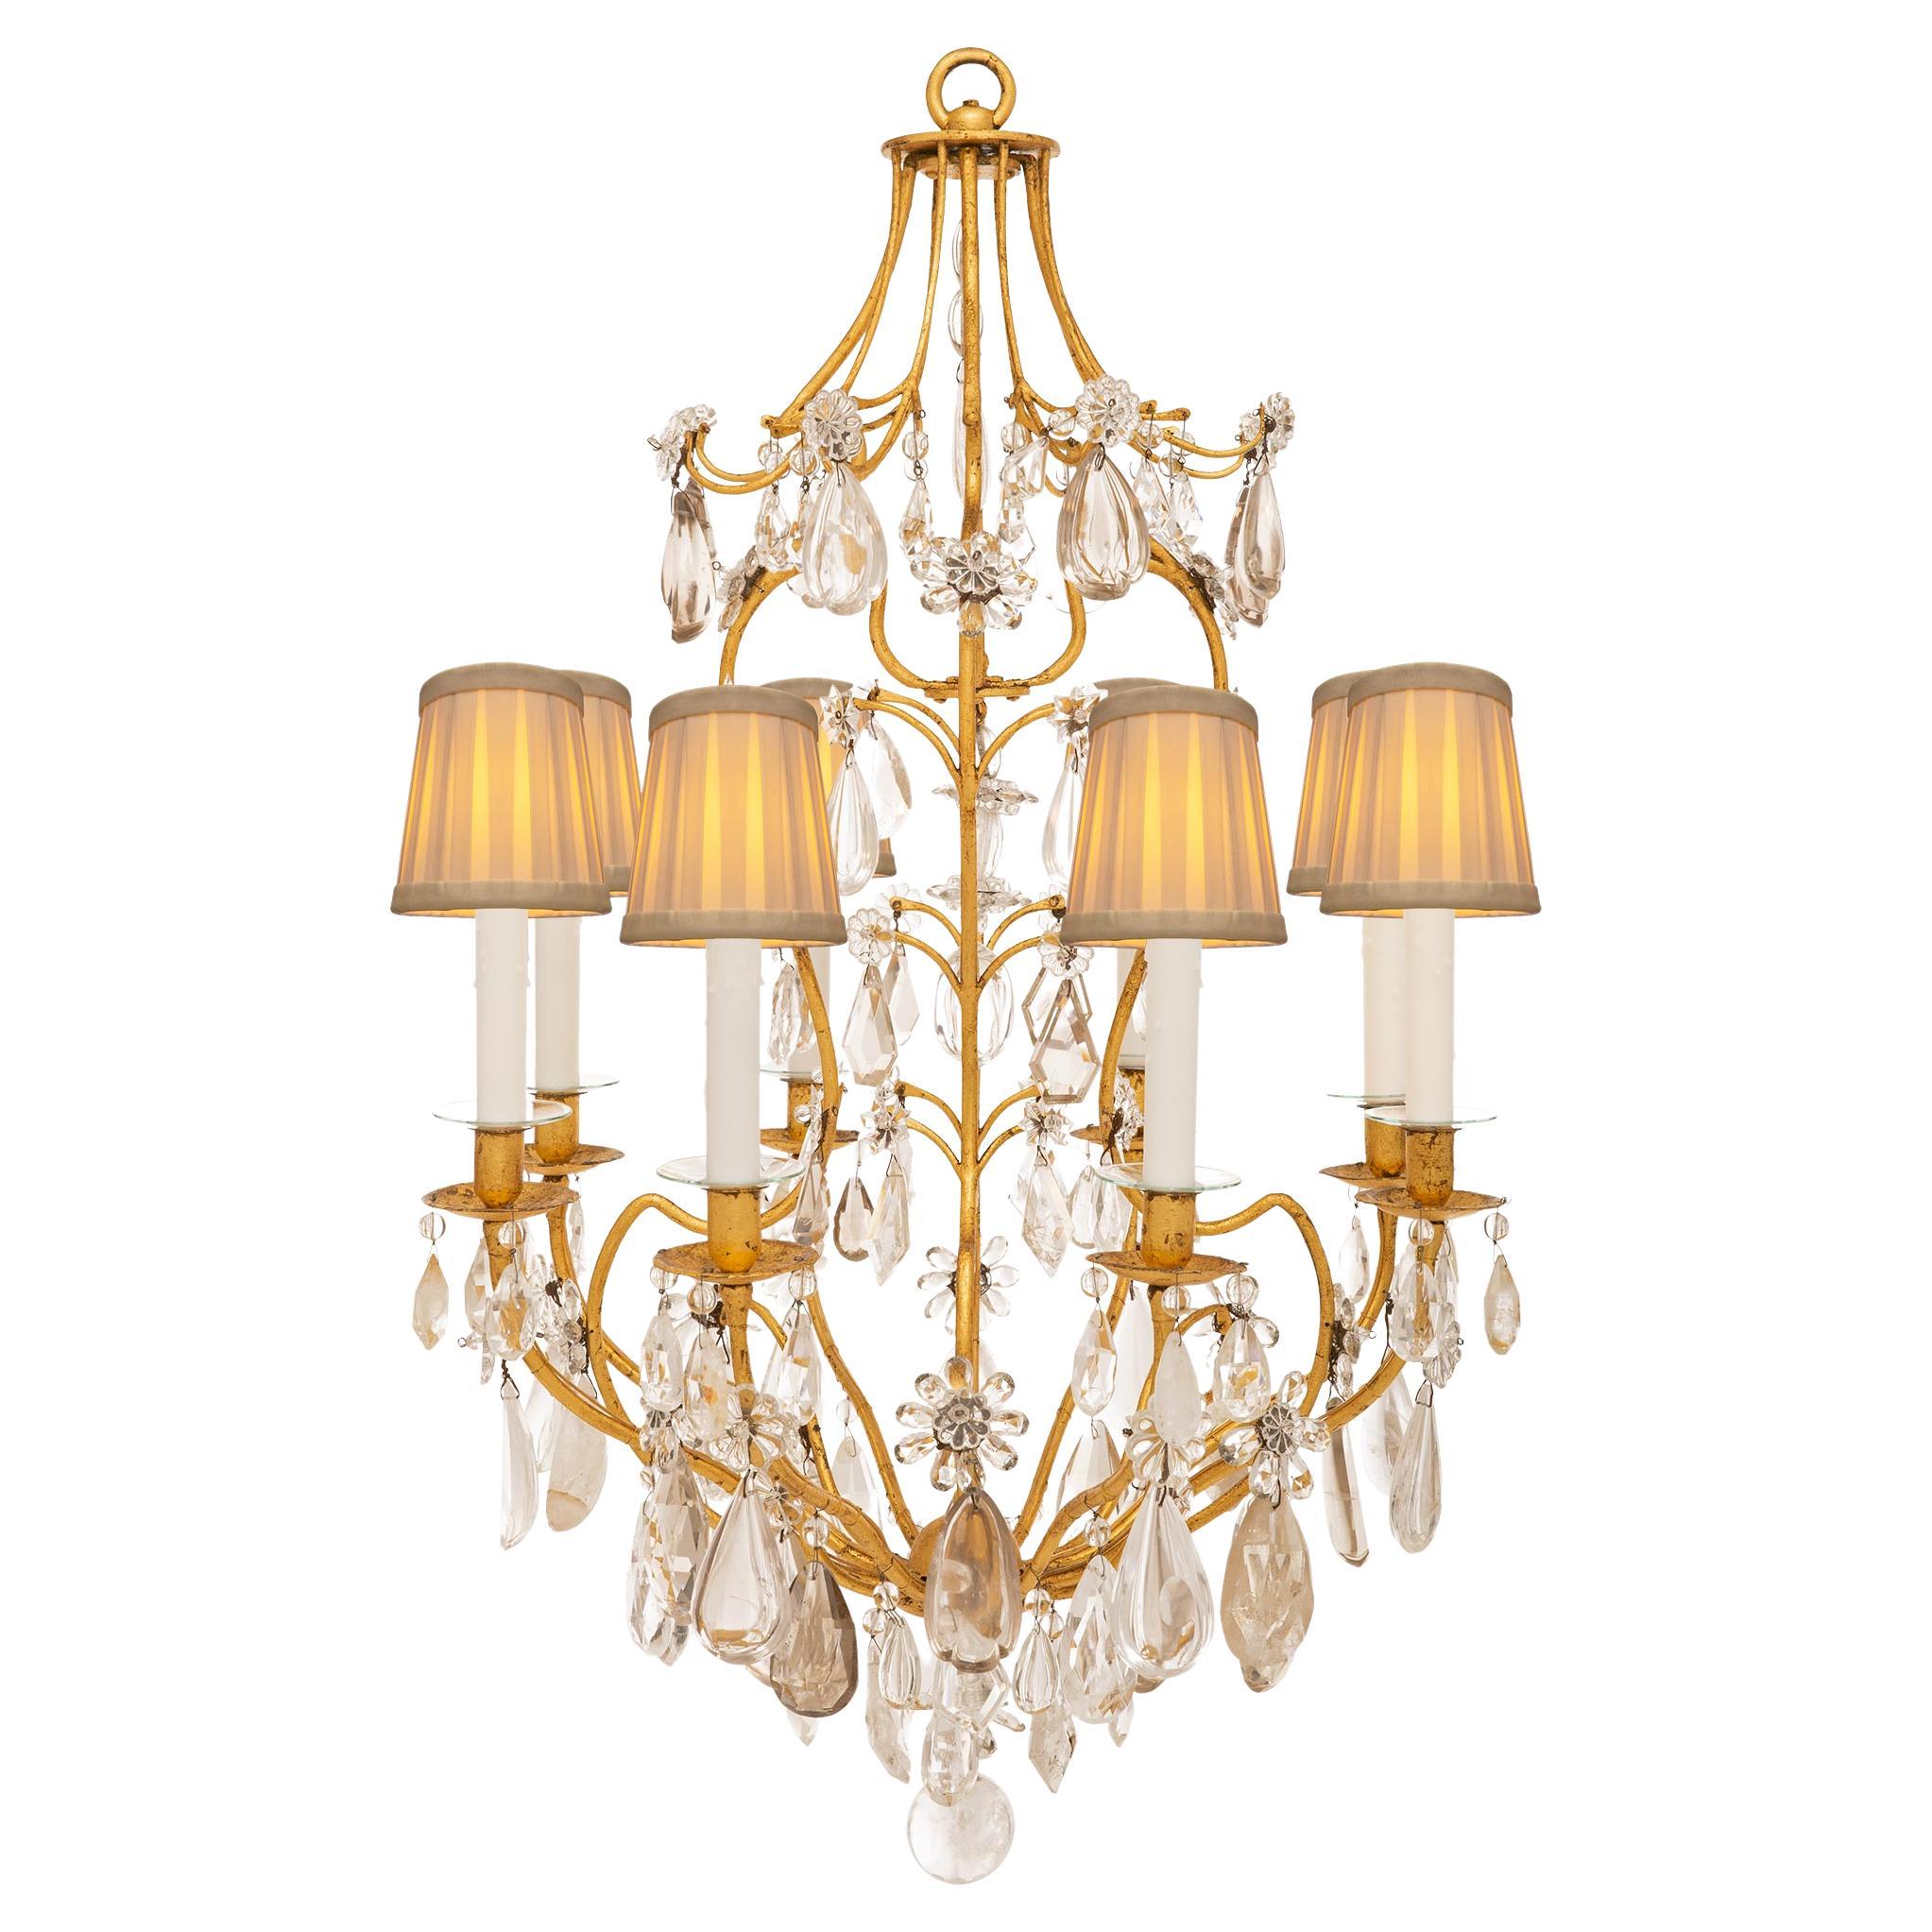 A French 19th century Gilt Iron, crystal and rock crystal chandelier For Sale